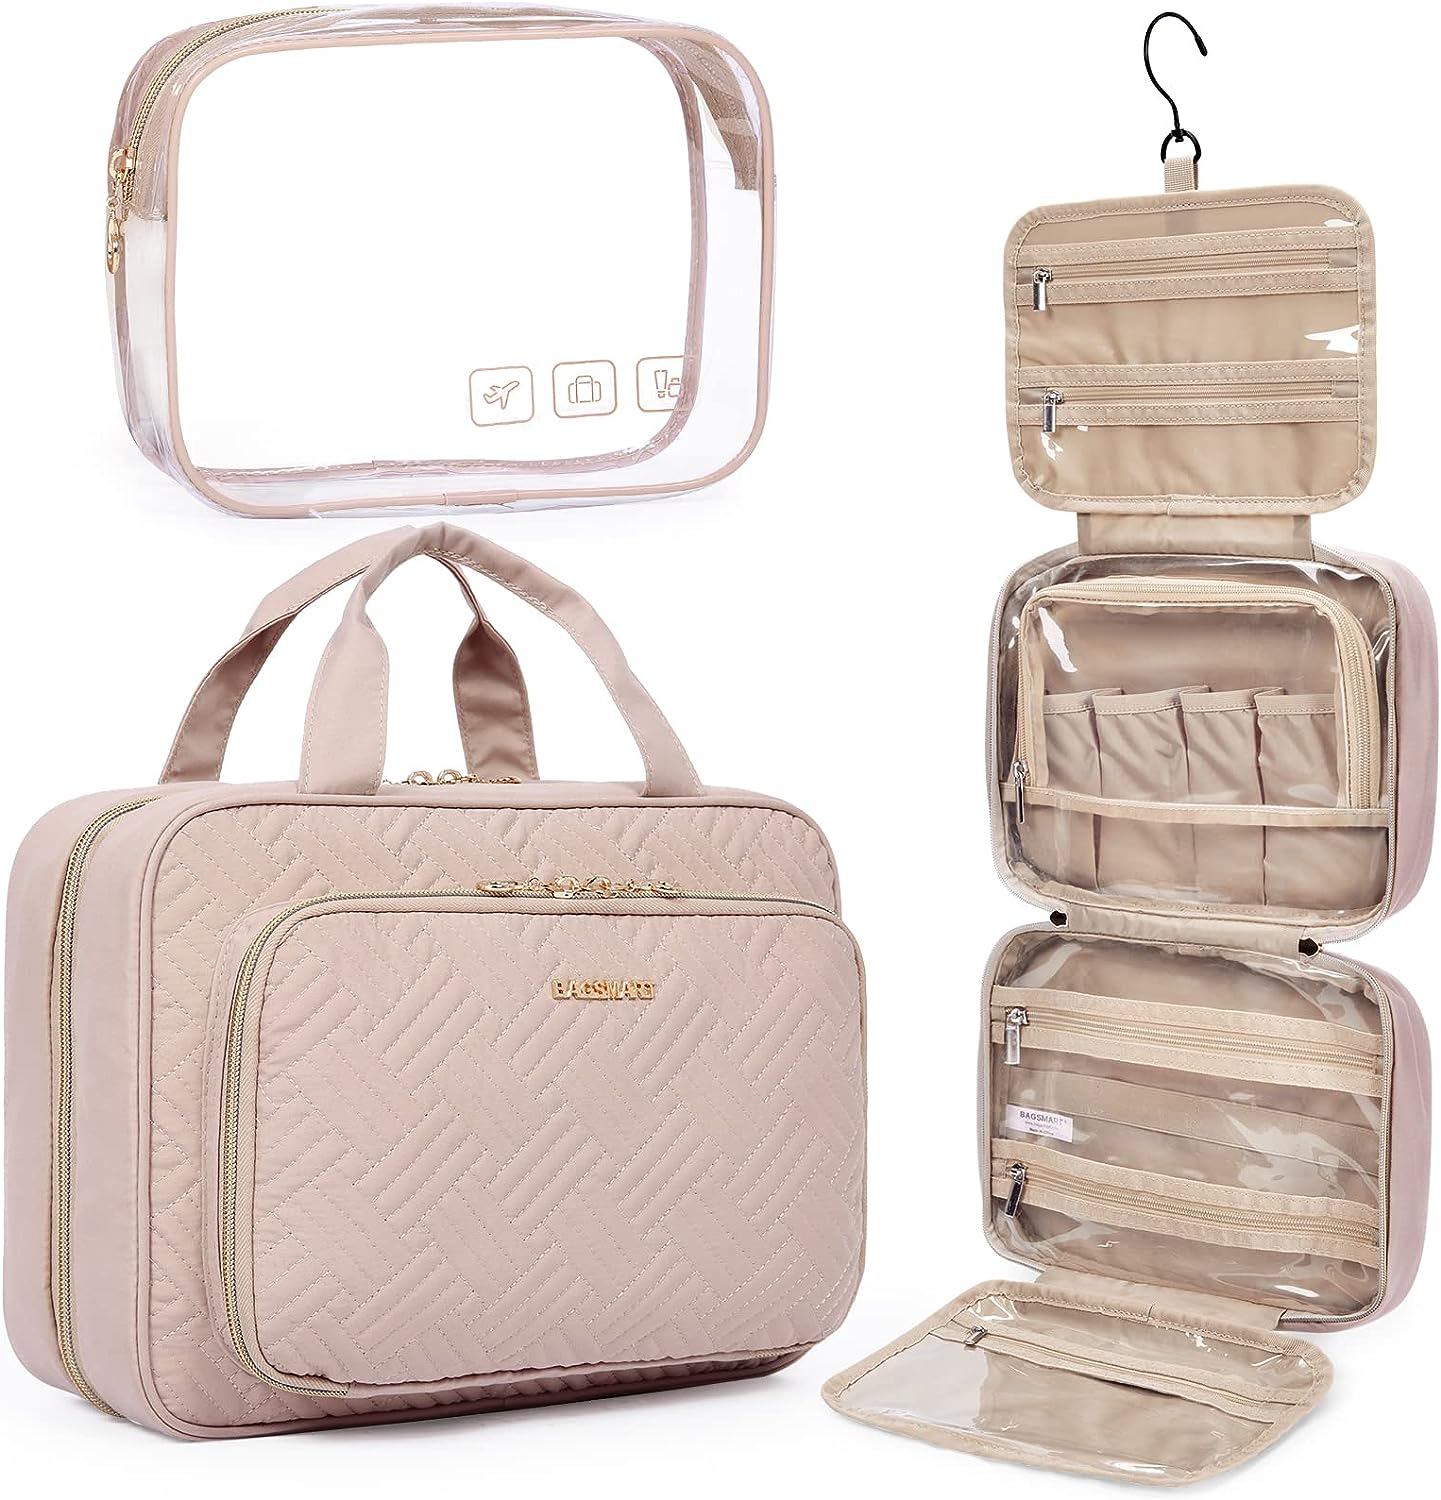 Hanginig toiletry bag and organiser wirh clear cases